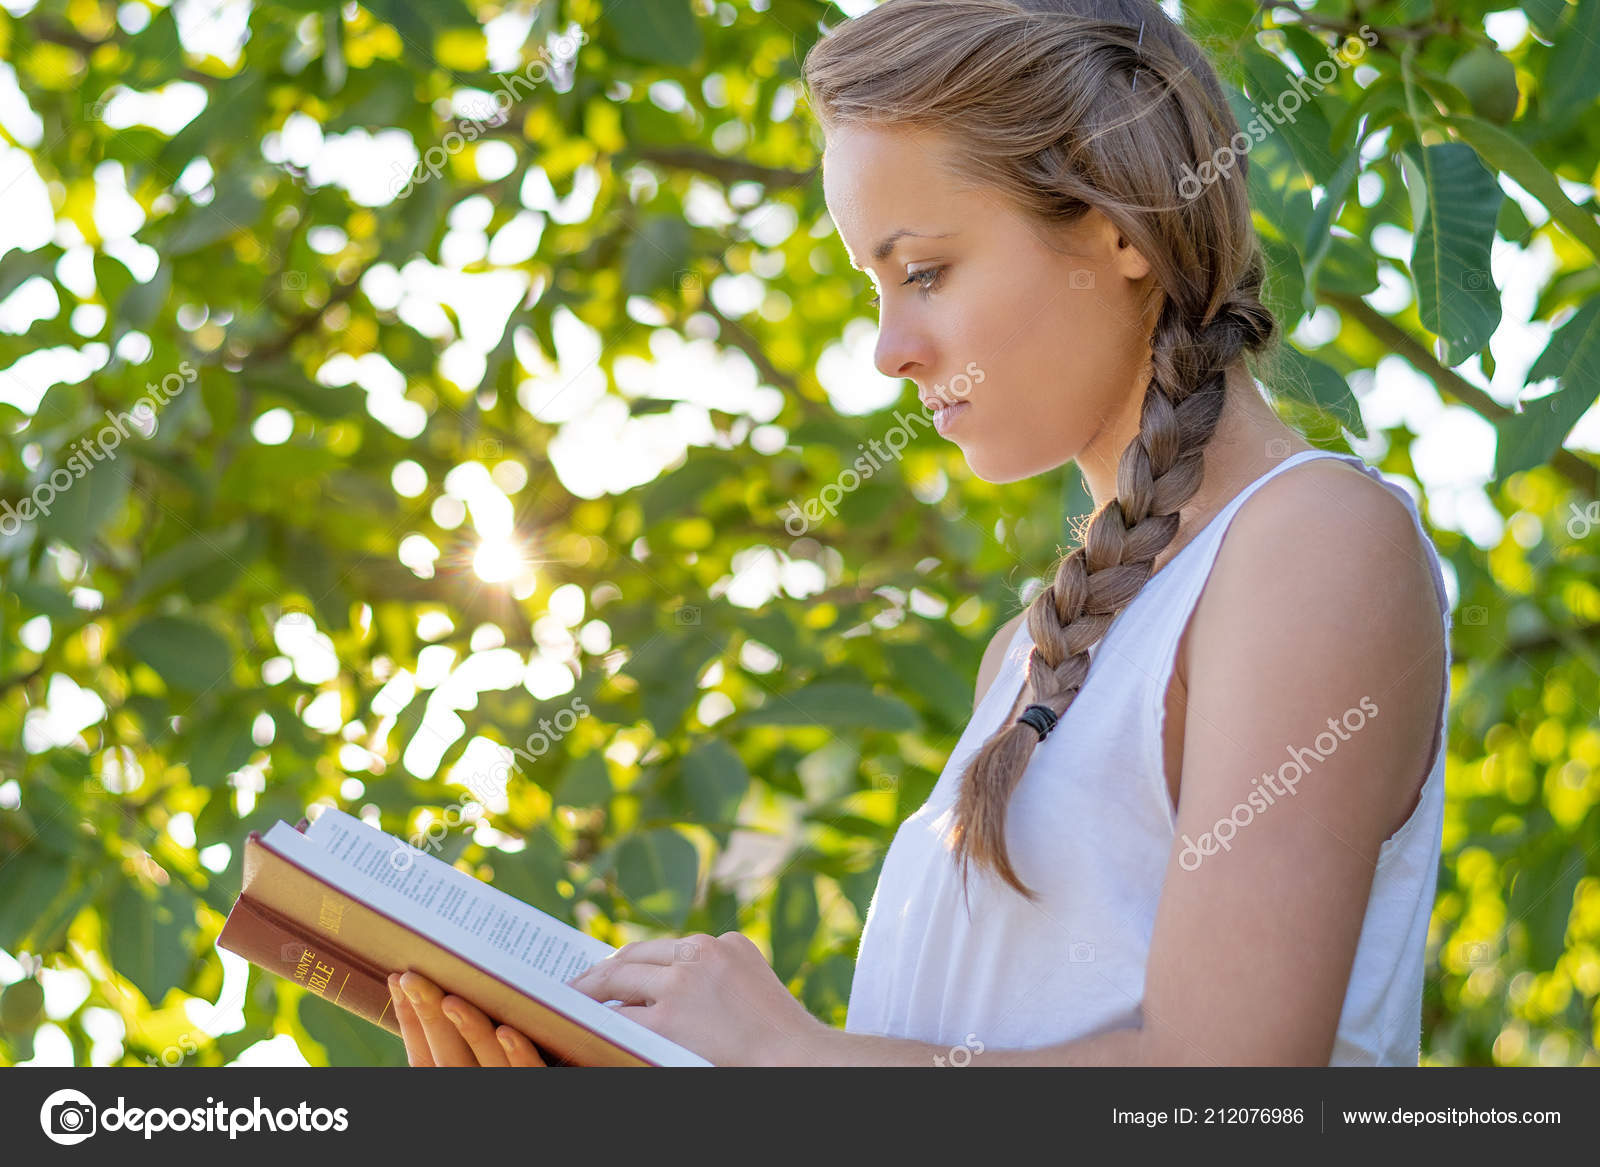 Christian Worship Praise Young Woman Reading Bible Early - 